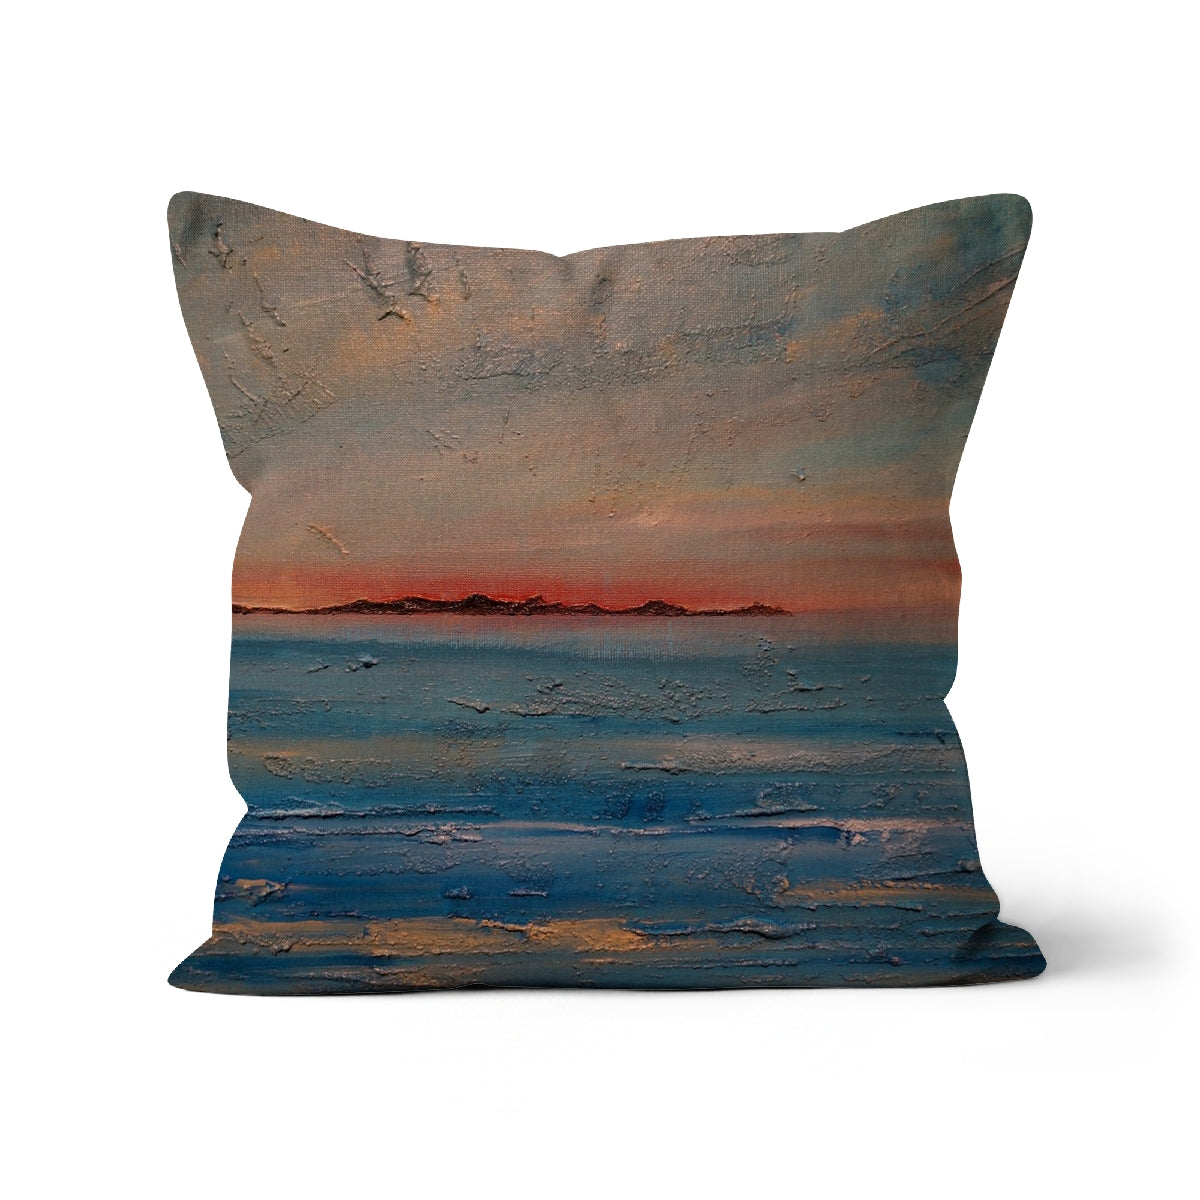 Gigha Sunset Art Gifts Cushion-Cushions-Hebridean Islands Art Gallery-Canvas-18"x18"-Paintings, Prints, Homeware, Art Gifts From Scotland By Scottish Artist Kevin Hunter